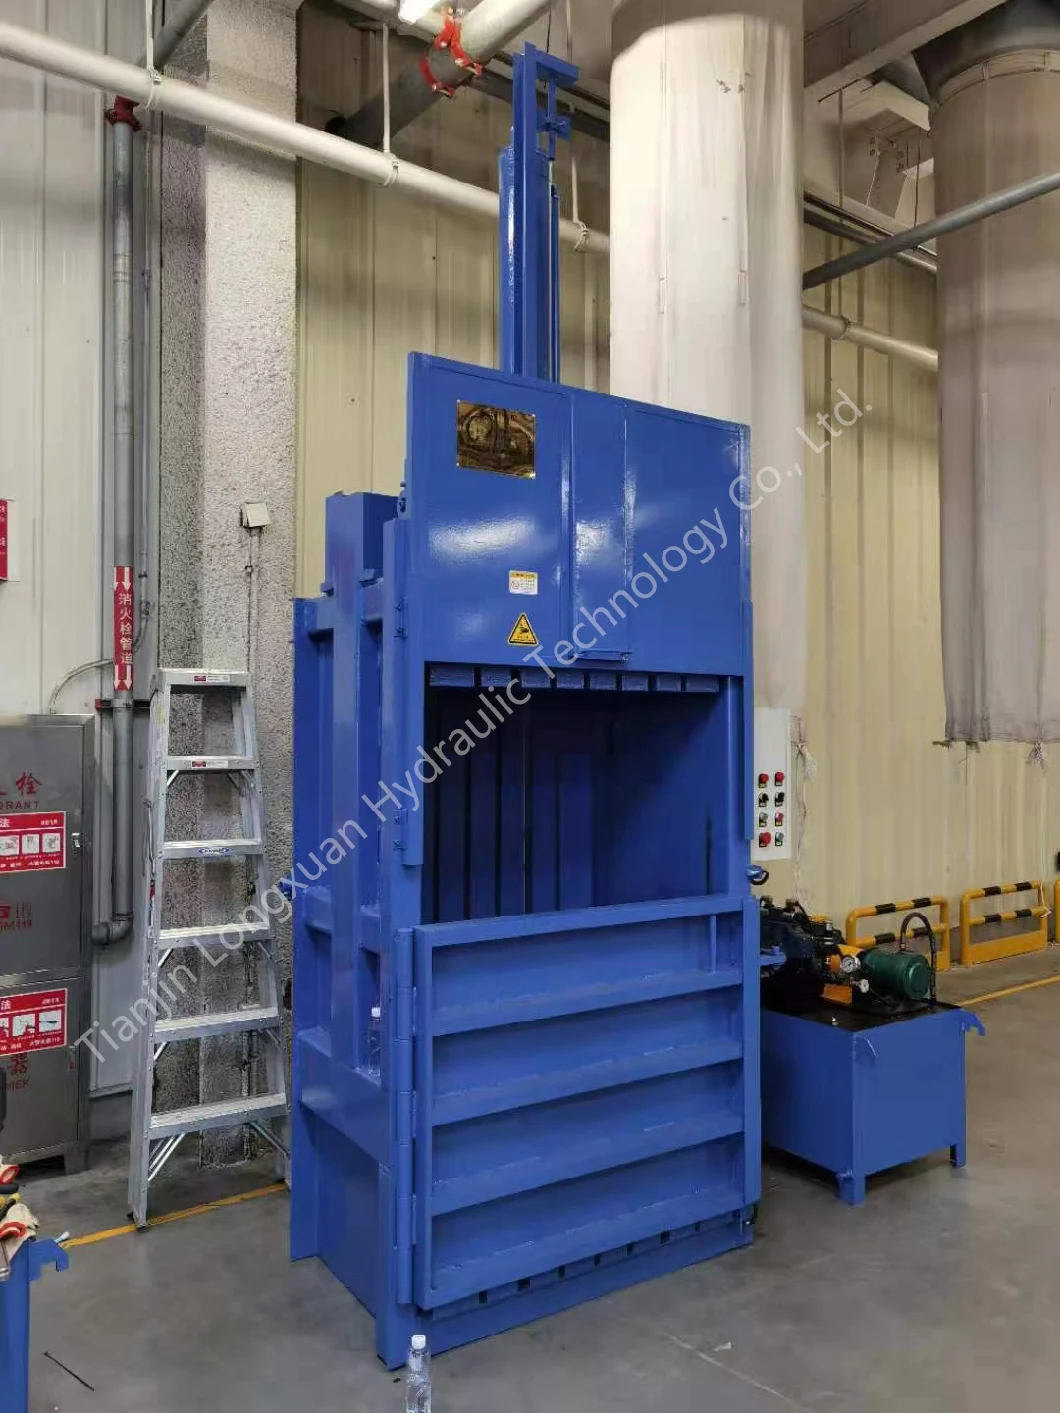 Hot Sale Small Vertical Baler for Waste Paper, Carton, Film, Outer Packaging Material